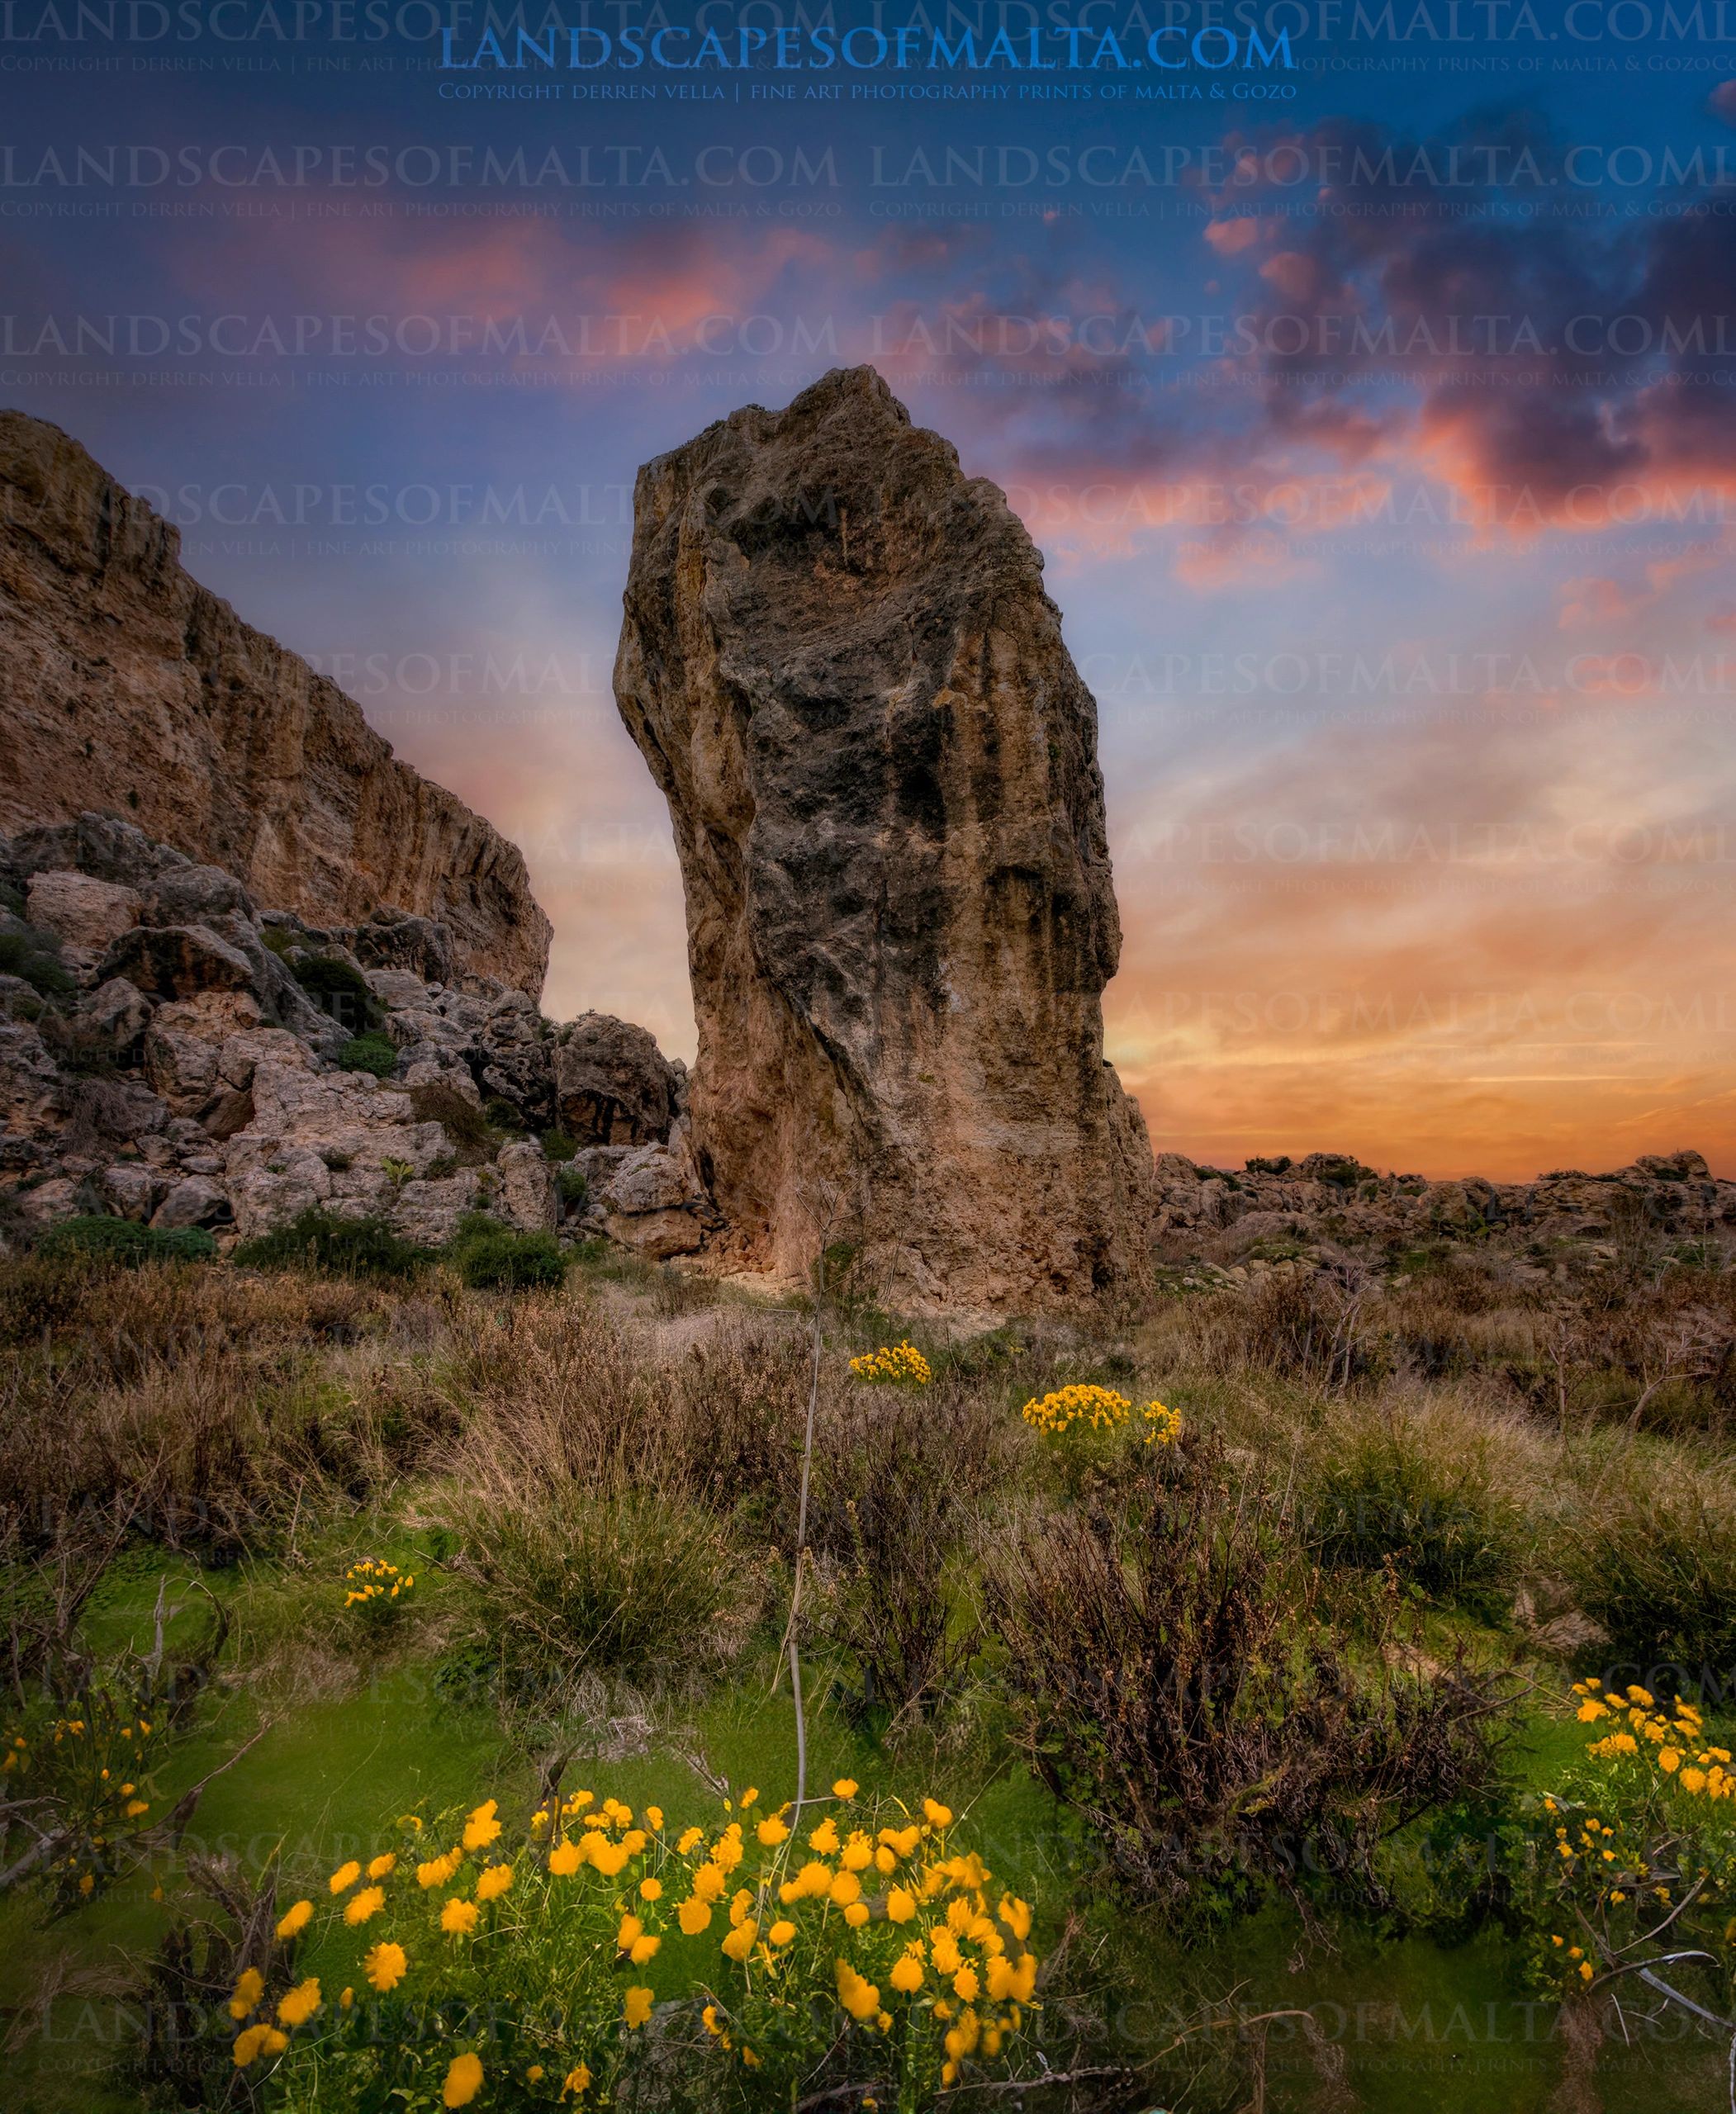 Sunrise from Nadur - Gozo
Tower of Power at wied ir-rihan in Gozo photographed at sunrise